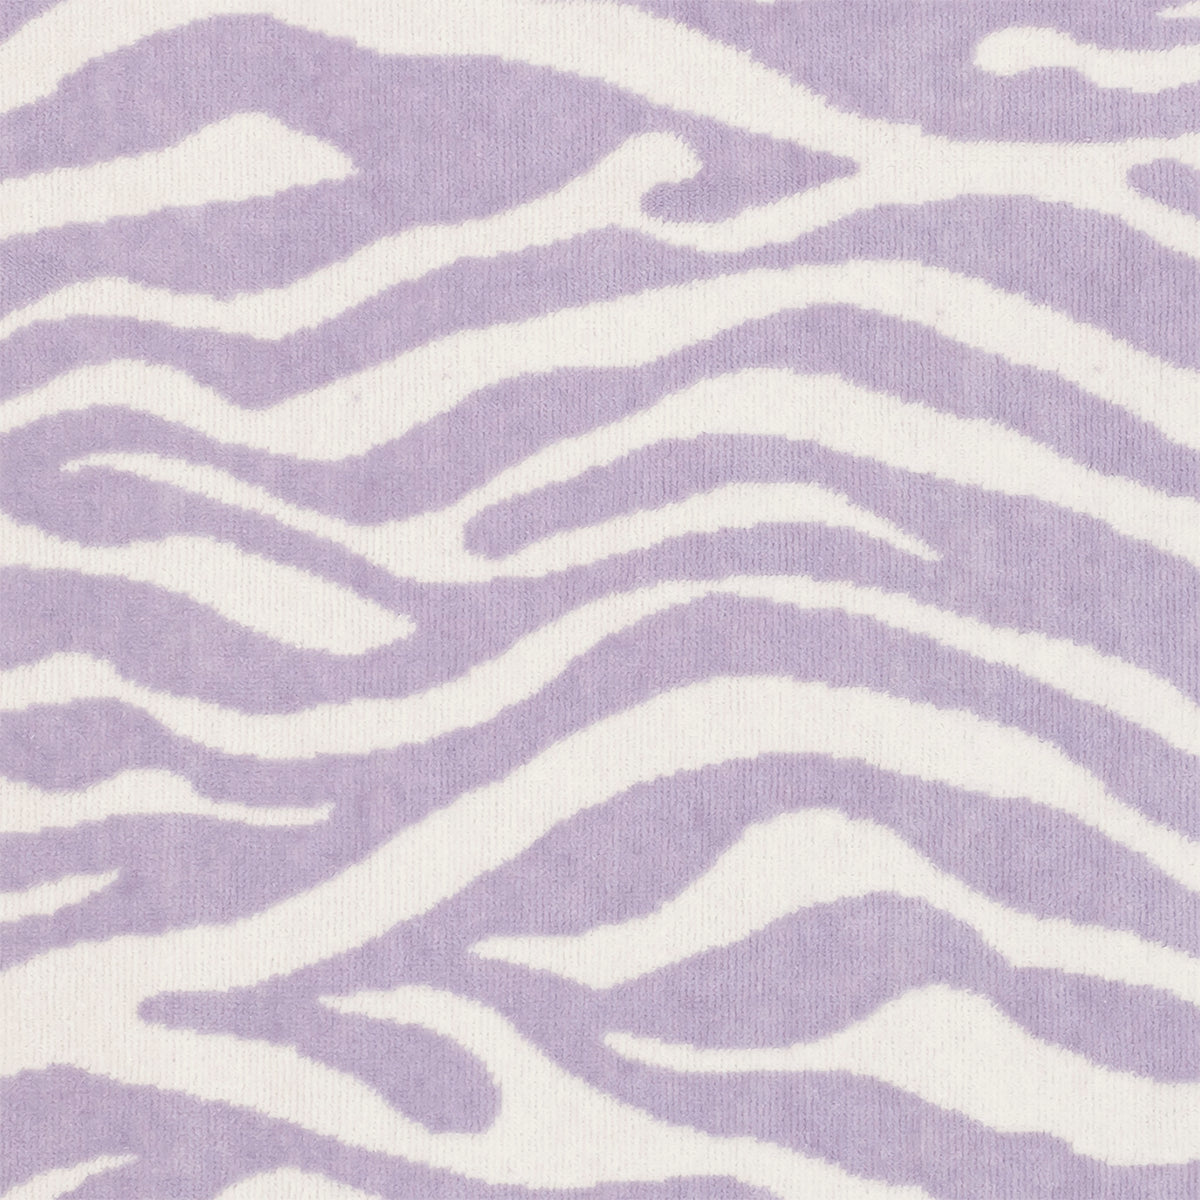 Swatch Sample of Matouk Santiago Beach Towels in Color Orchid